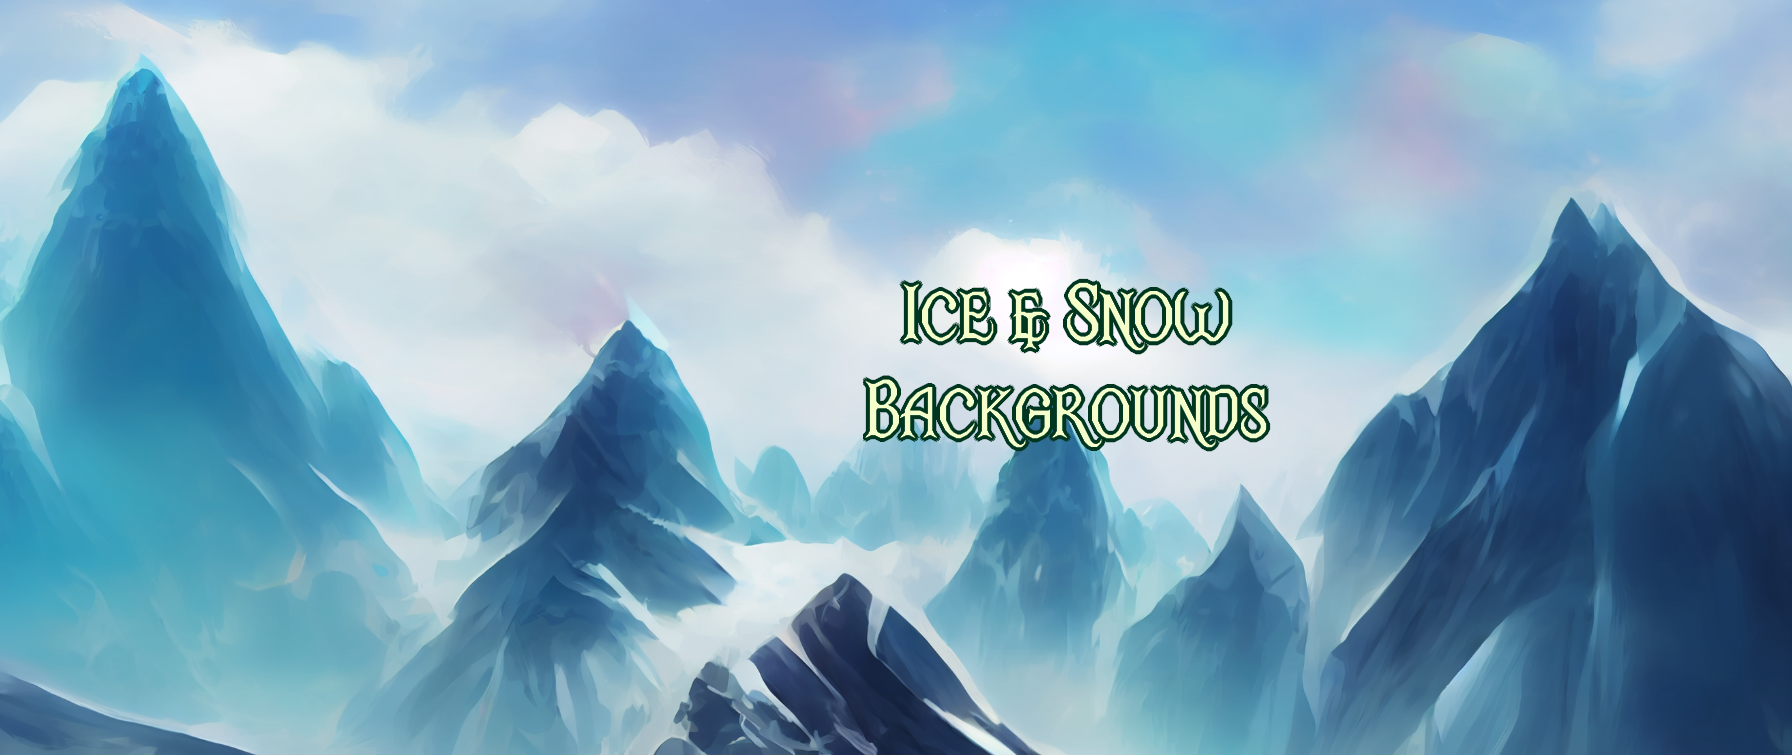 Fantasy Ice and Snow Backgrounds